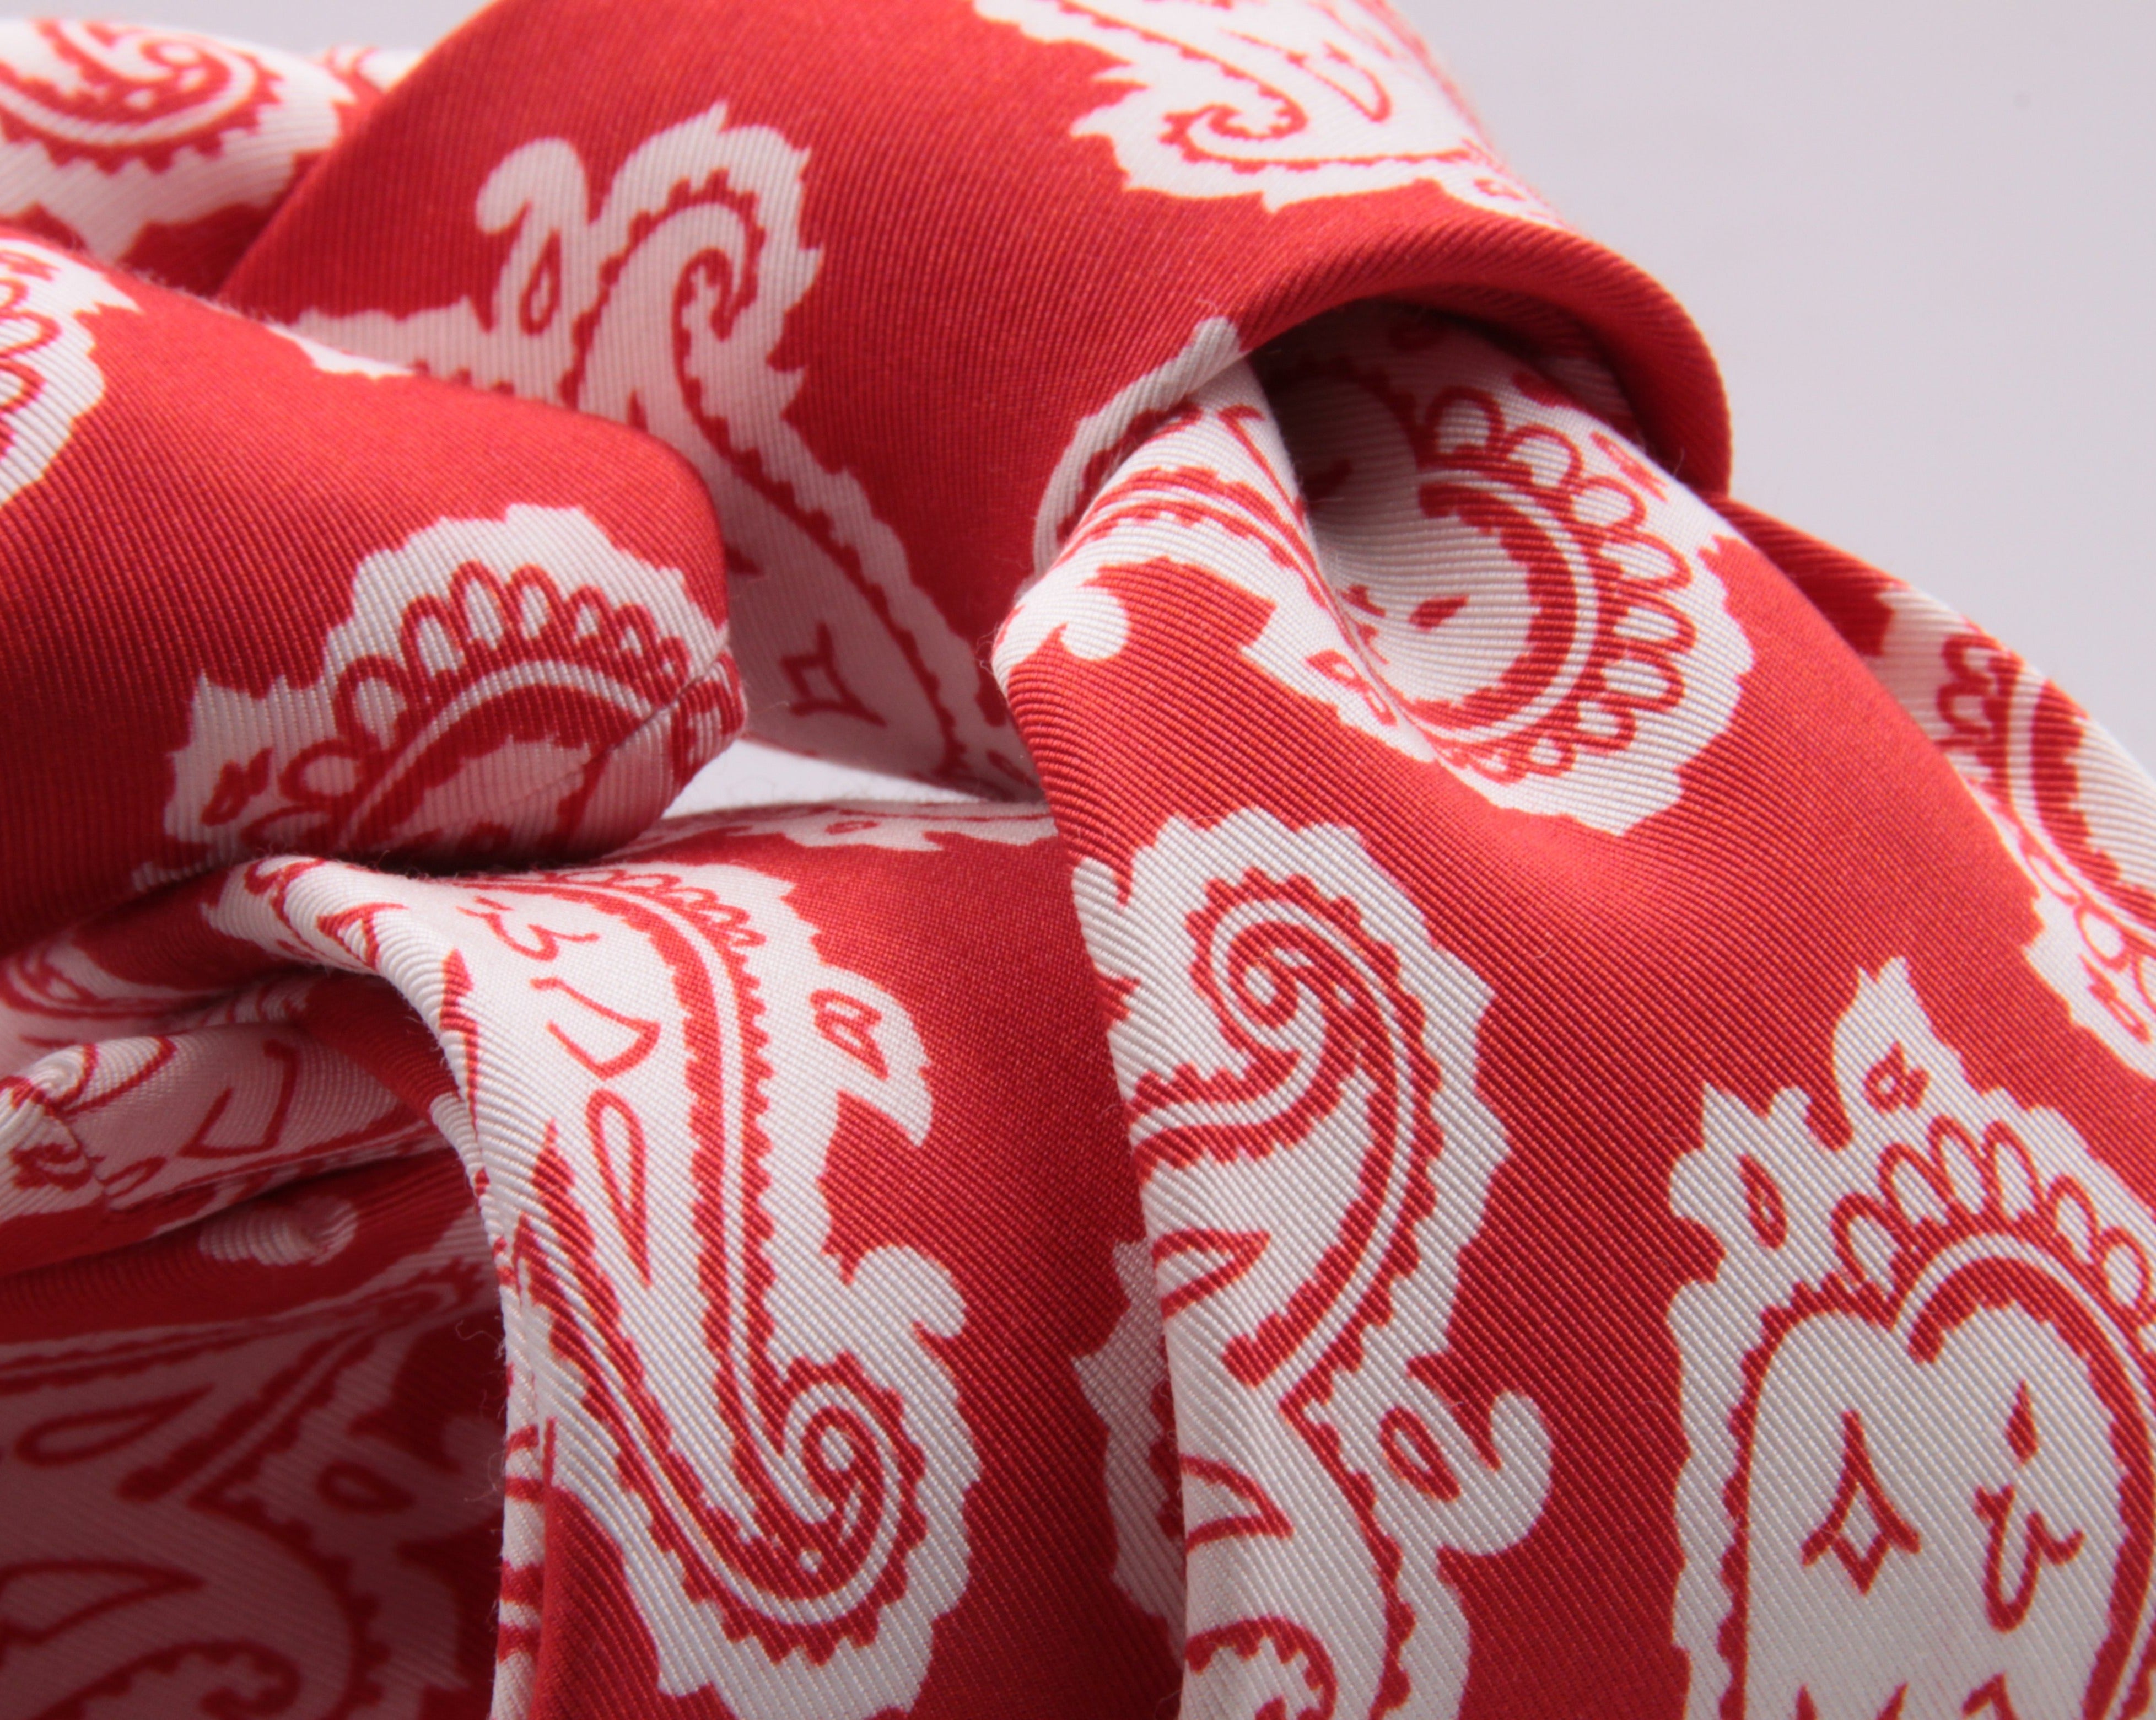 Drake's for Cruciani e Bella Printed 60% Silk 40% Cotton Self-Tipped Red and White Paysley Motif Tie Handmade in London, England 8 cm x 149 cm #5427